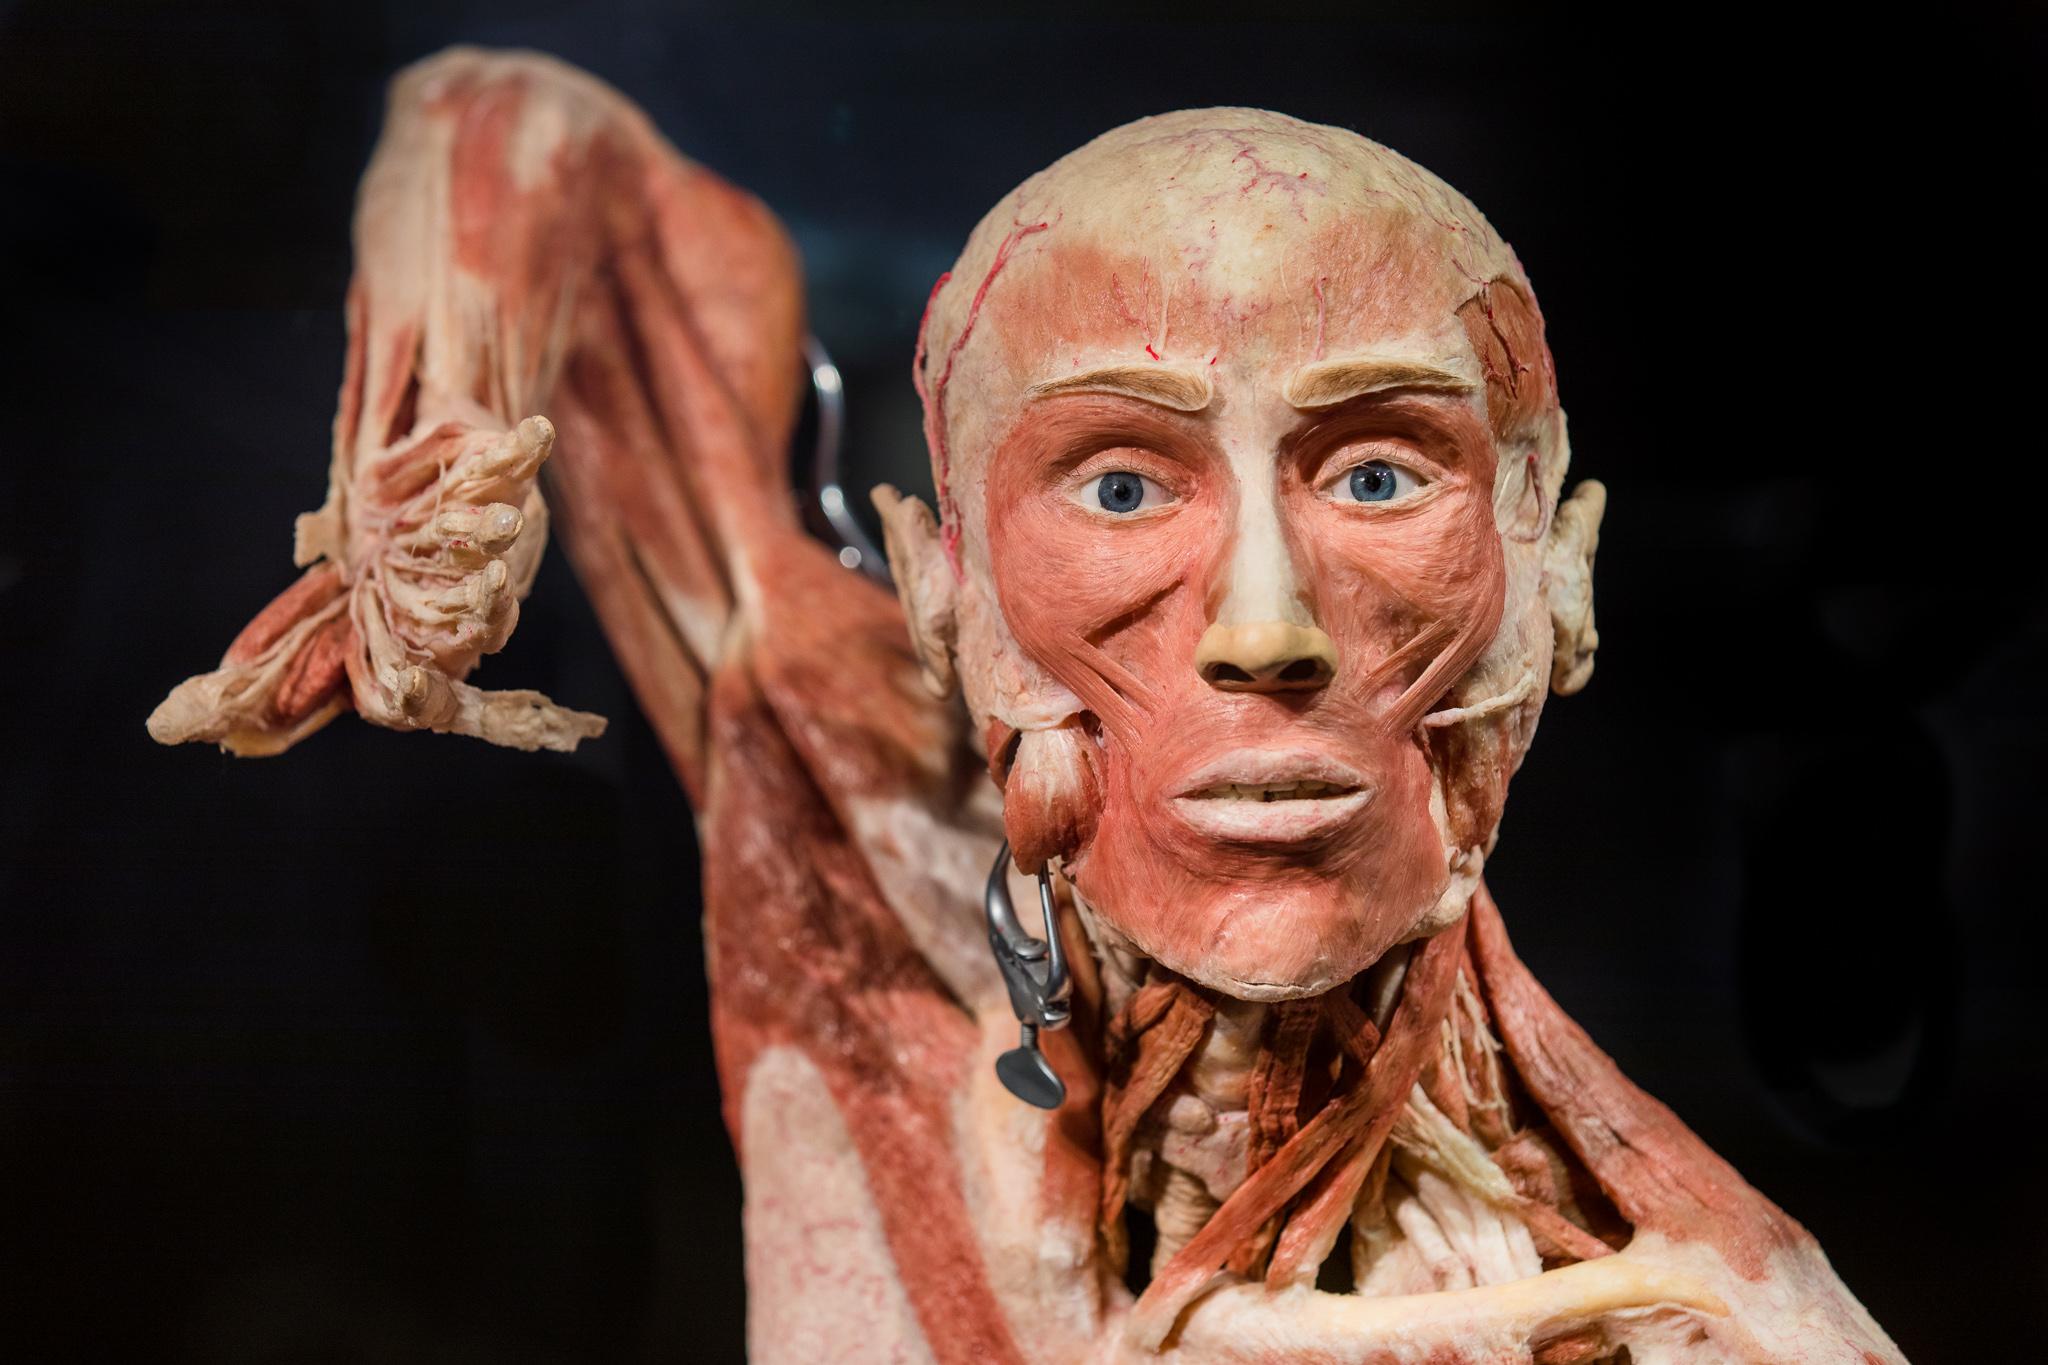 BODY WORLDS entreeticket